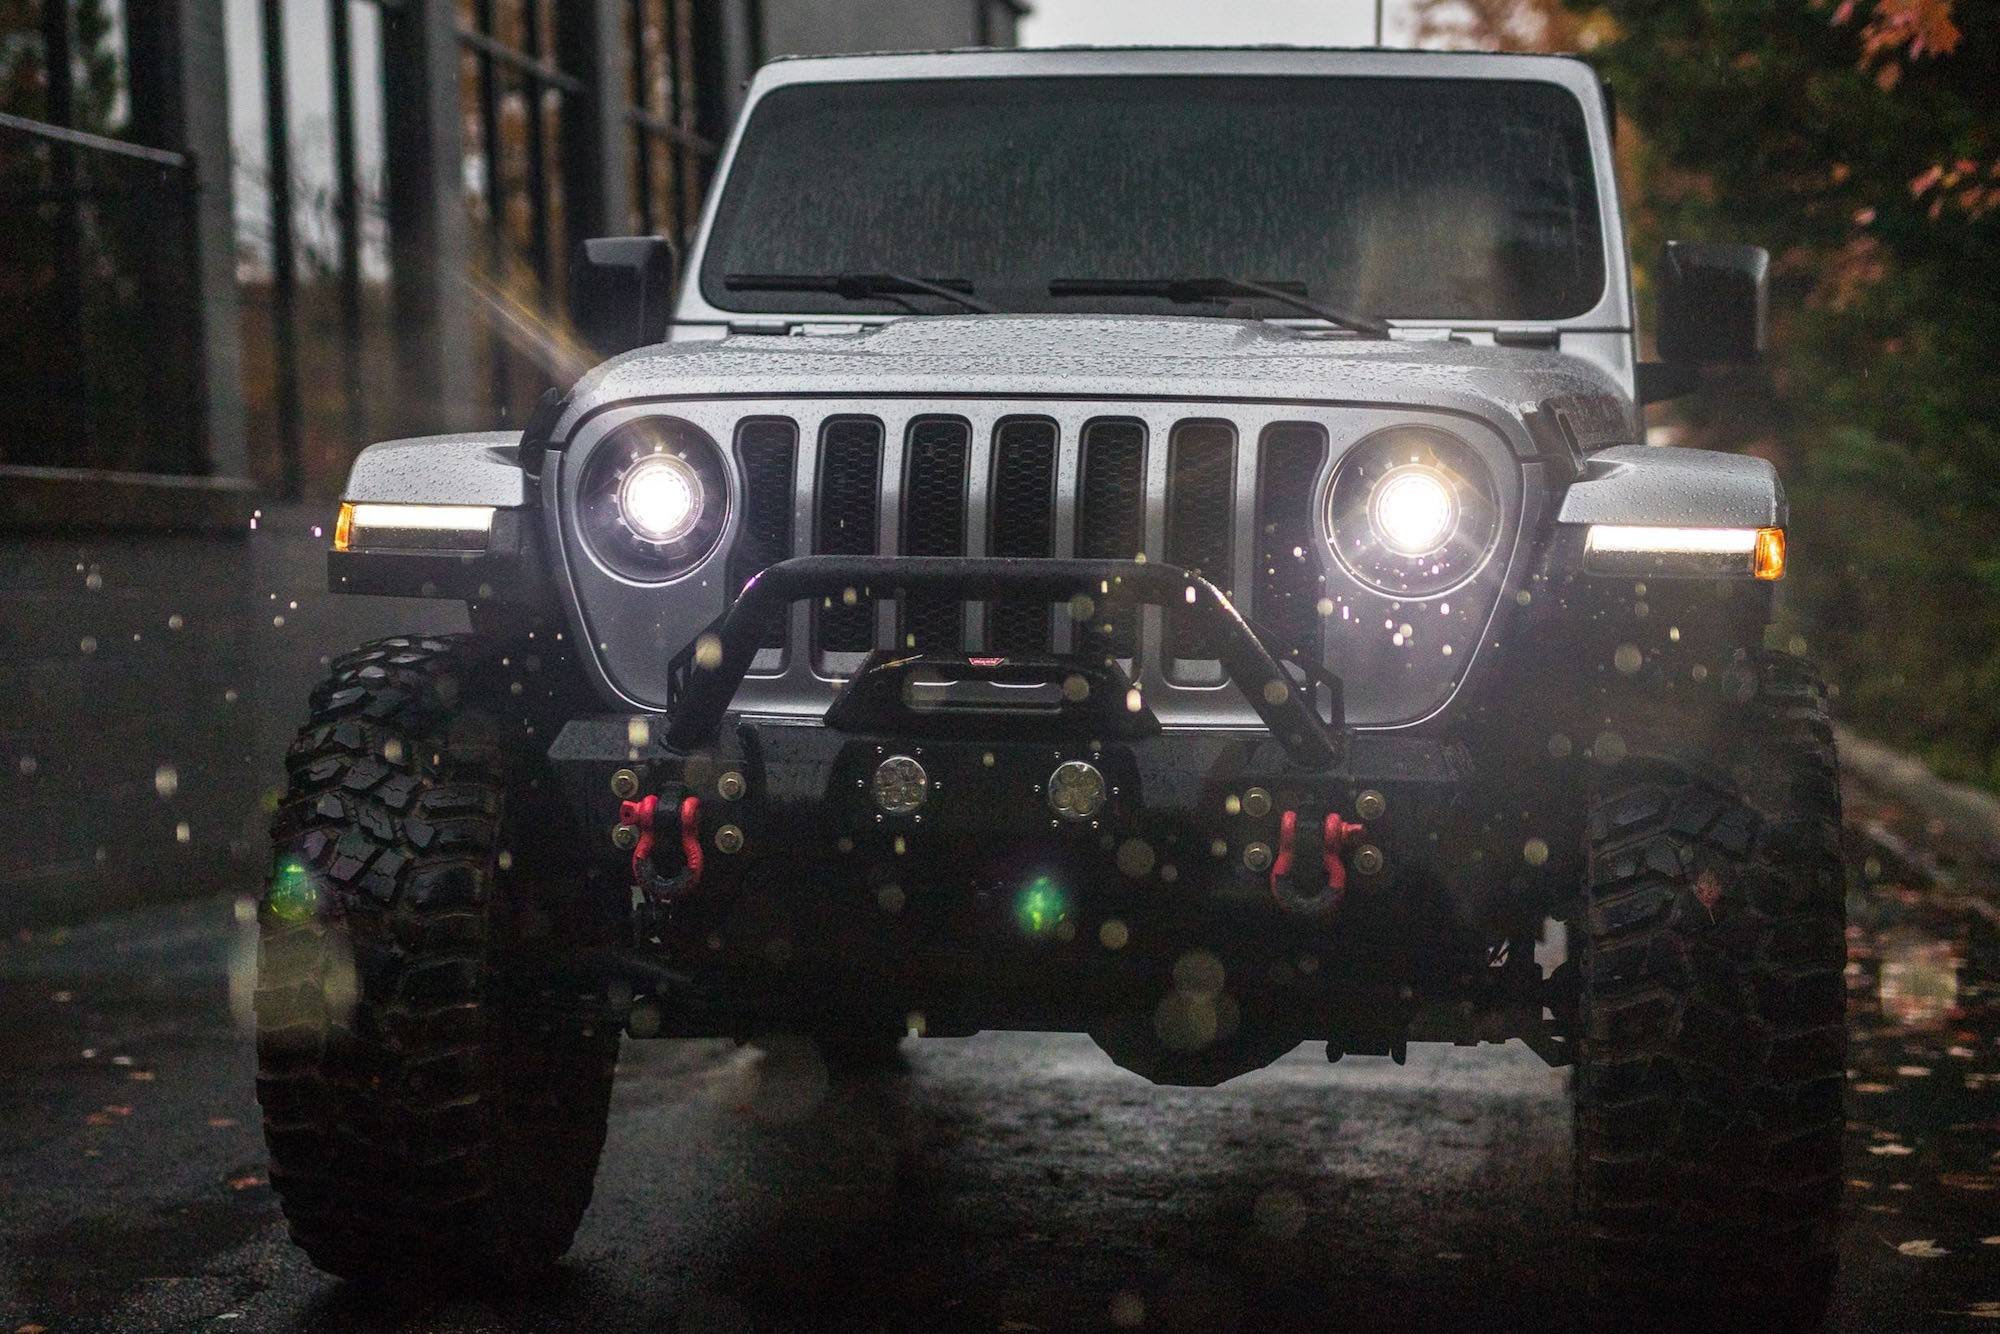 Front view of a Jeep Wrangler with headlights on